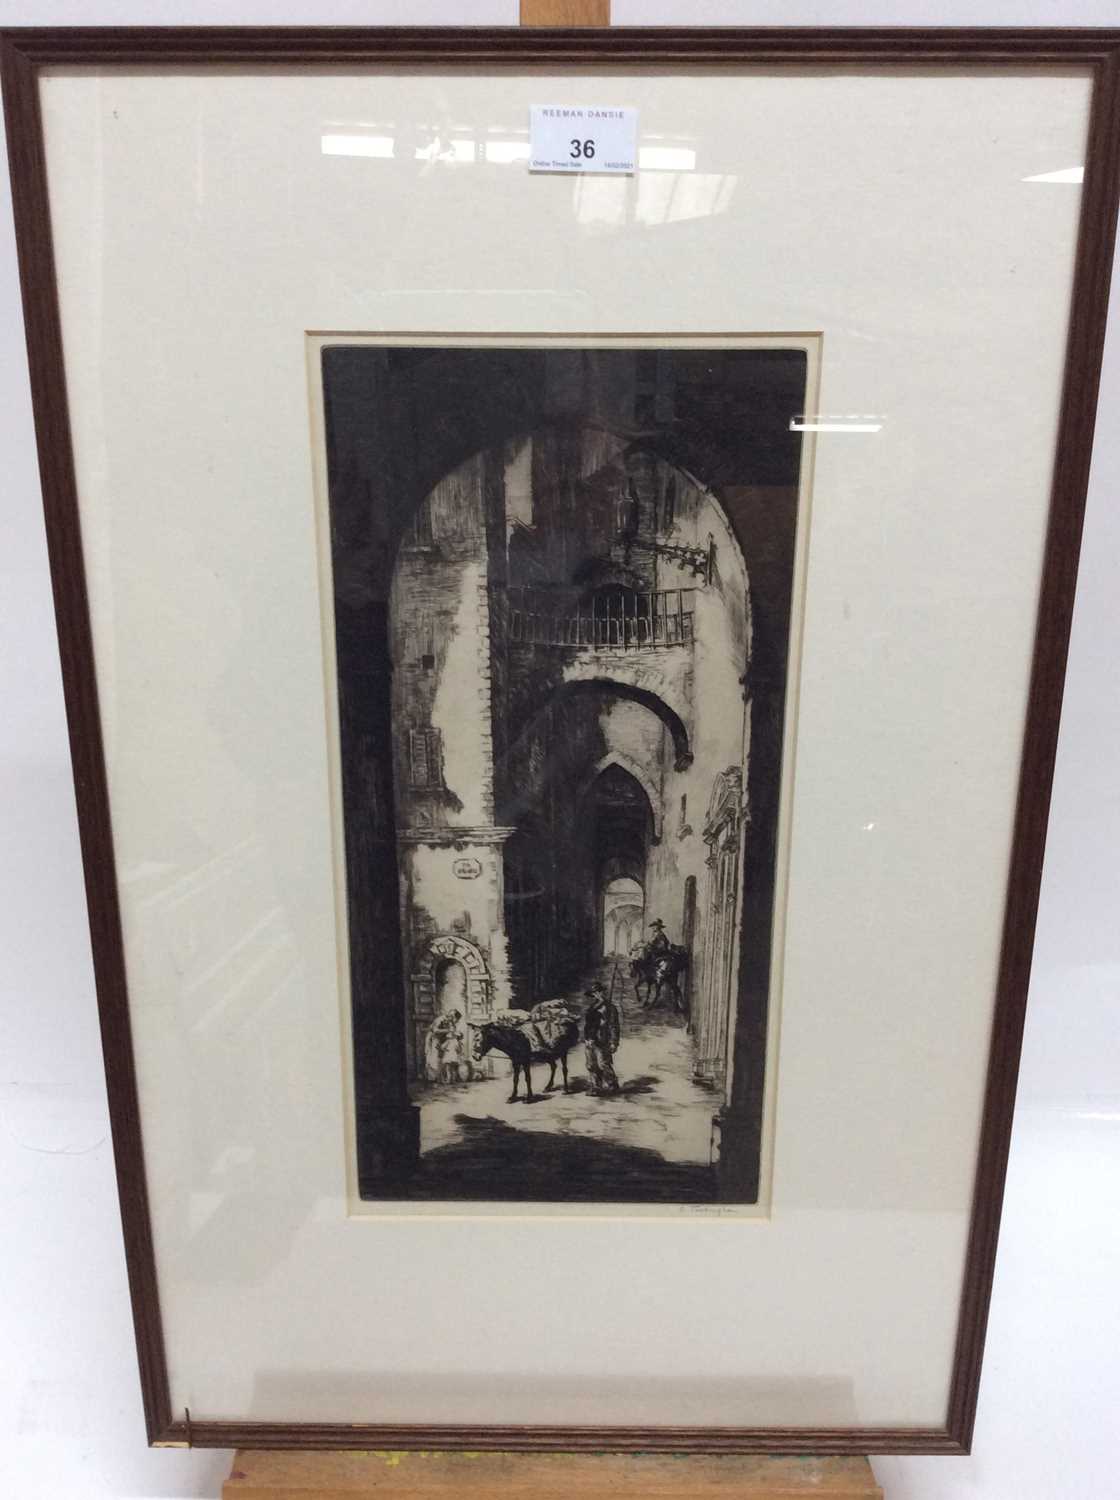 Lot 36 - Sidney Tushingham (1884-1968) signed black and white etching - Continental Street, in glazed frame, 39cm x 19cm